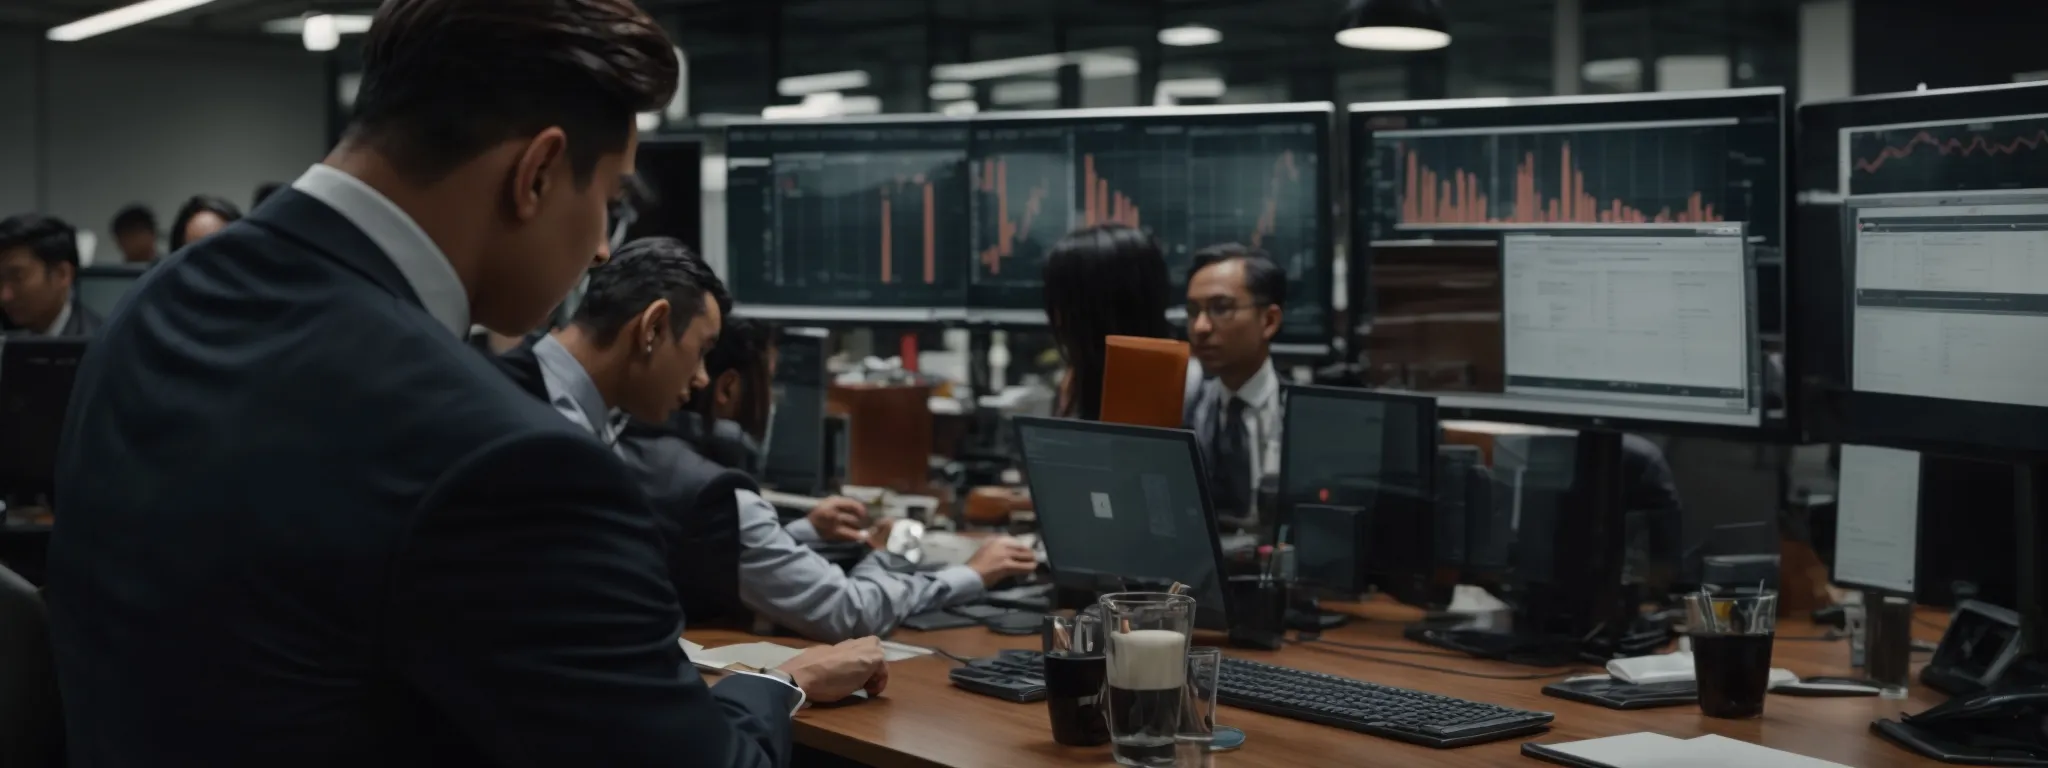 a bustling office setting where digital marketers analyze search engine results on large monitors.